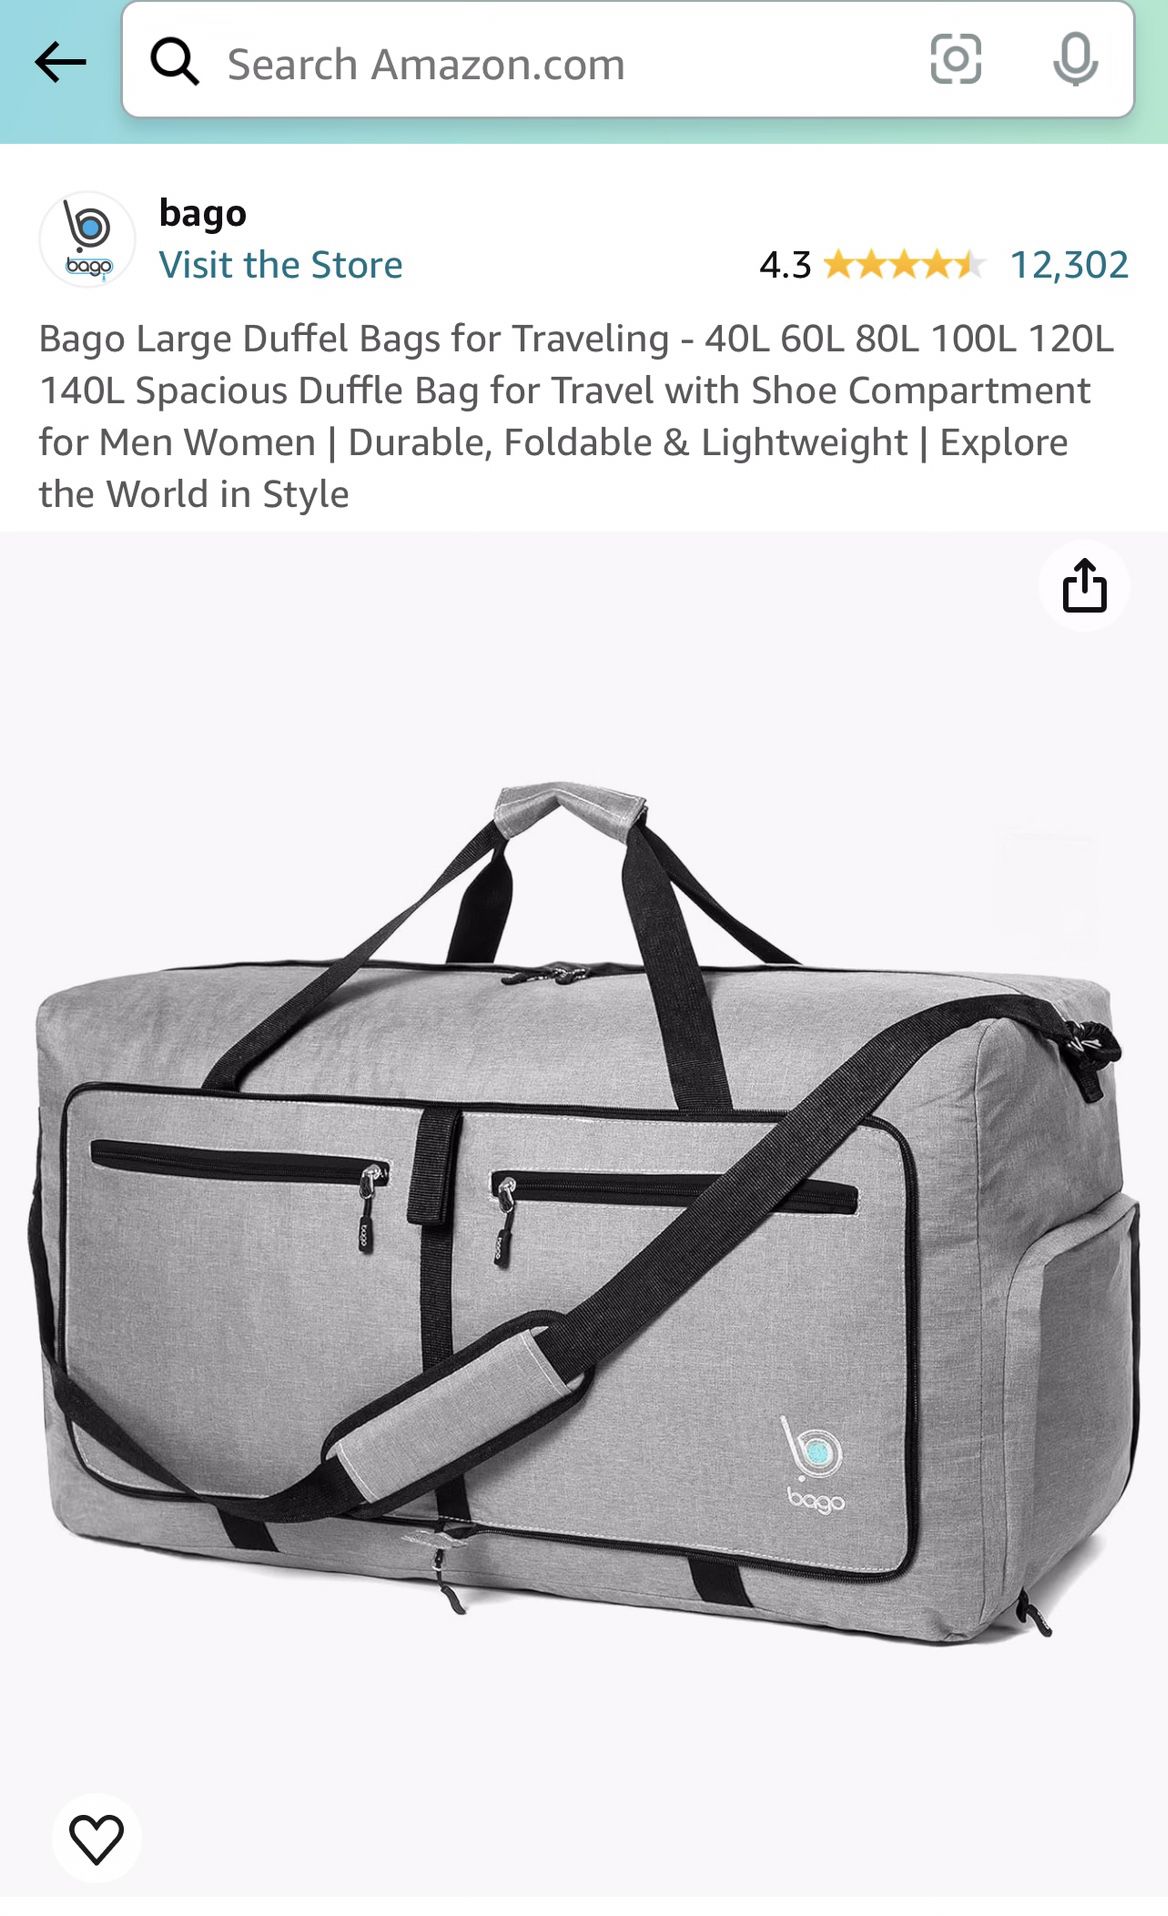 Bago Large Duffle Bag For Traveling - 80L